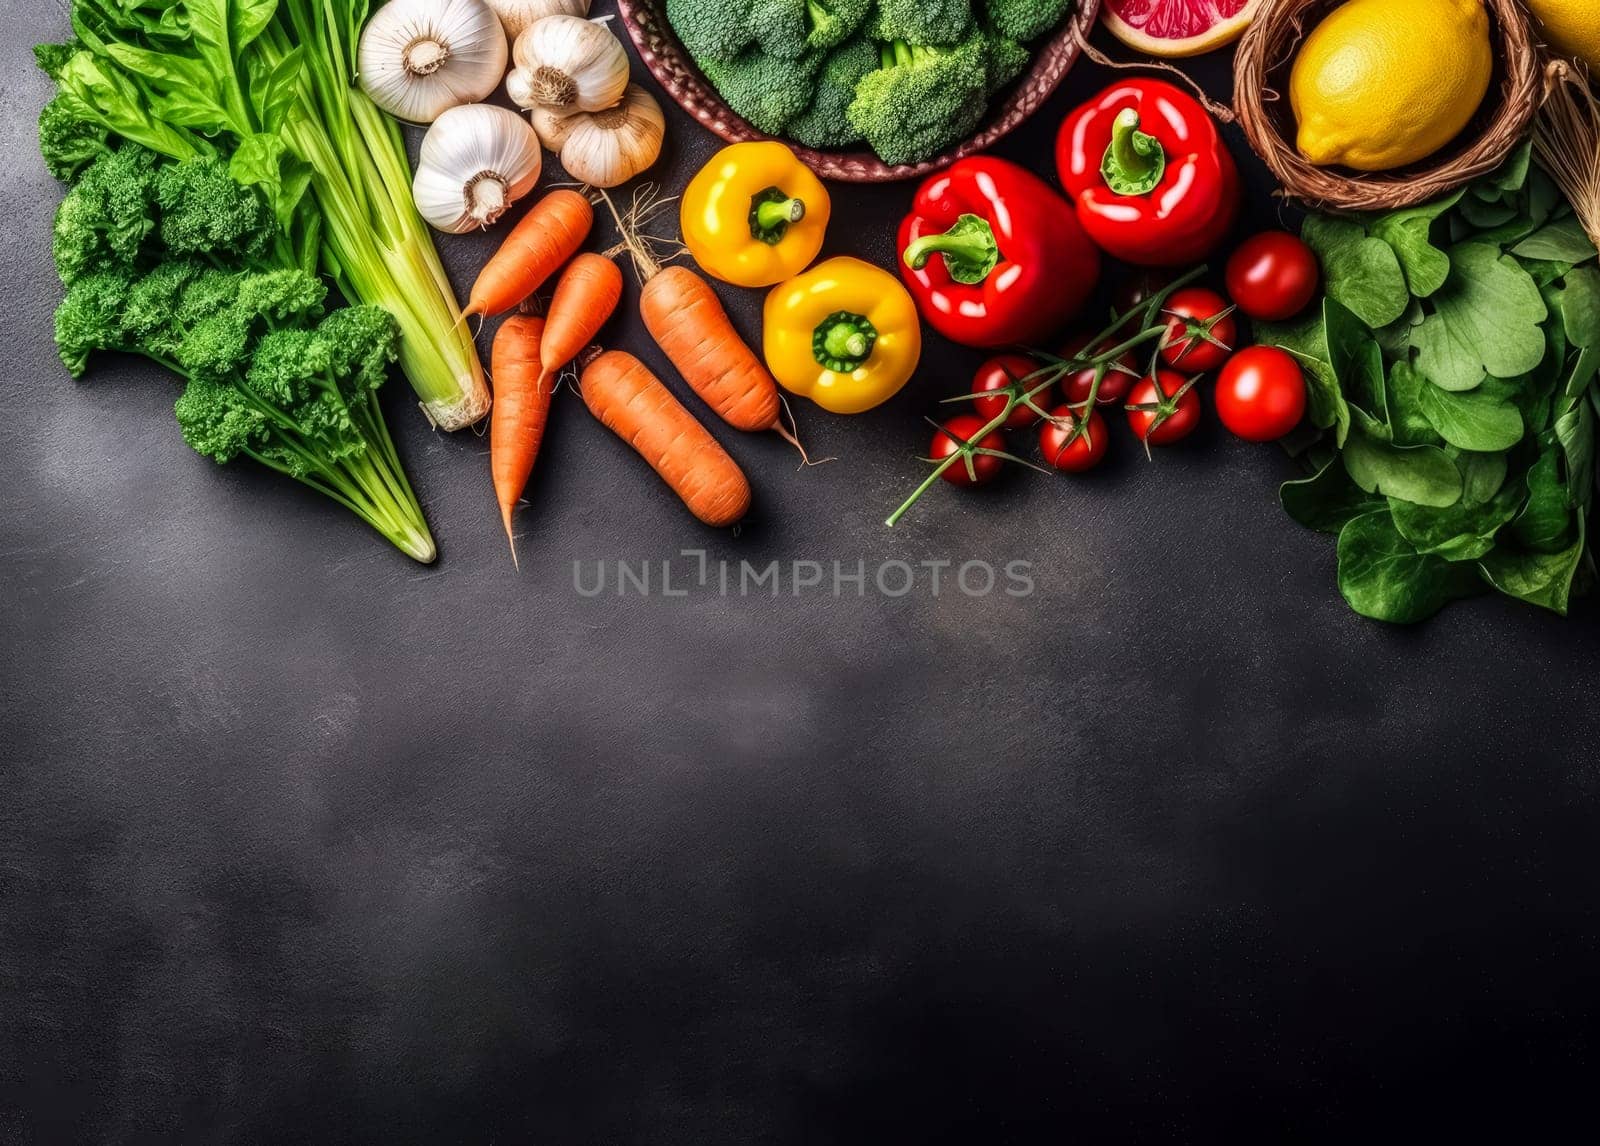 A variety of vegetables including carrots, broccoli, peppers, and tomatoes are arranged on a black background